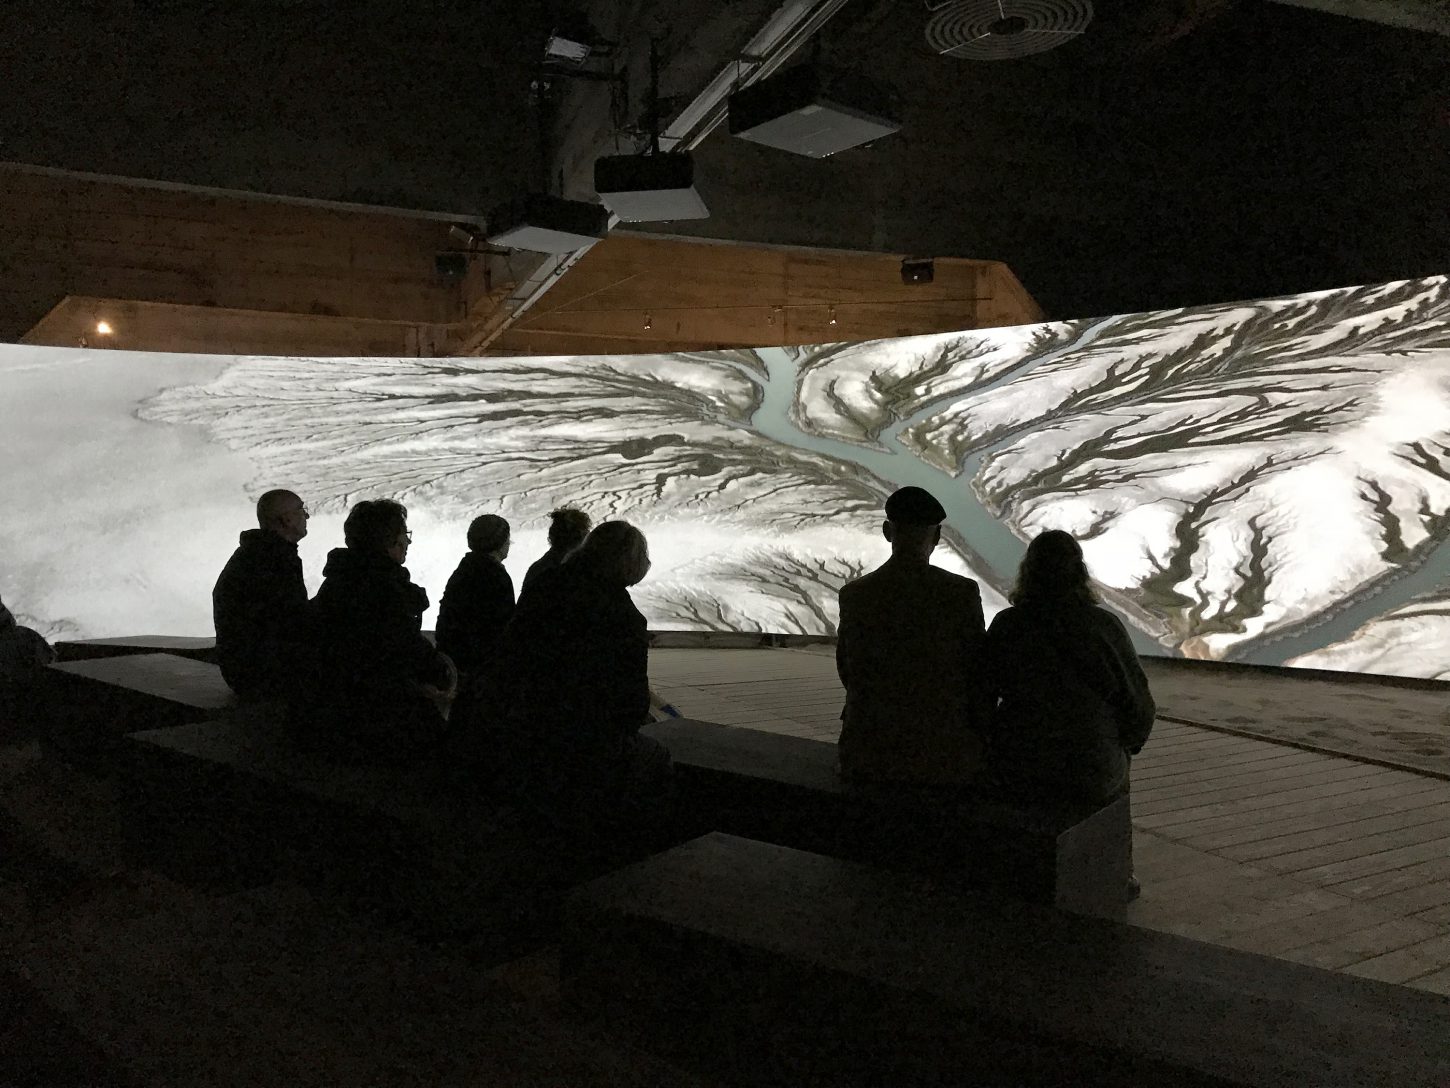 Panoramic audiovisual experience in the interactive exhibition "The Water will Come" at Watersnoodmuseum, The Netherlands